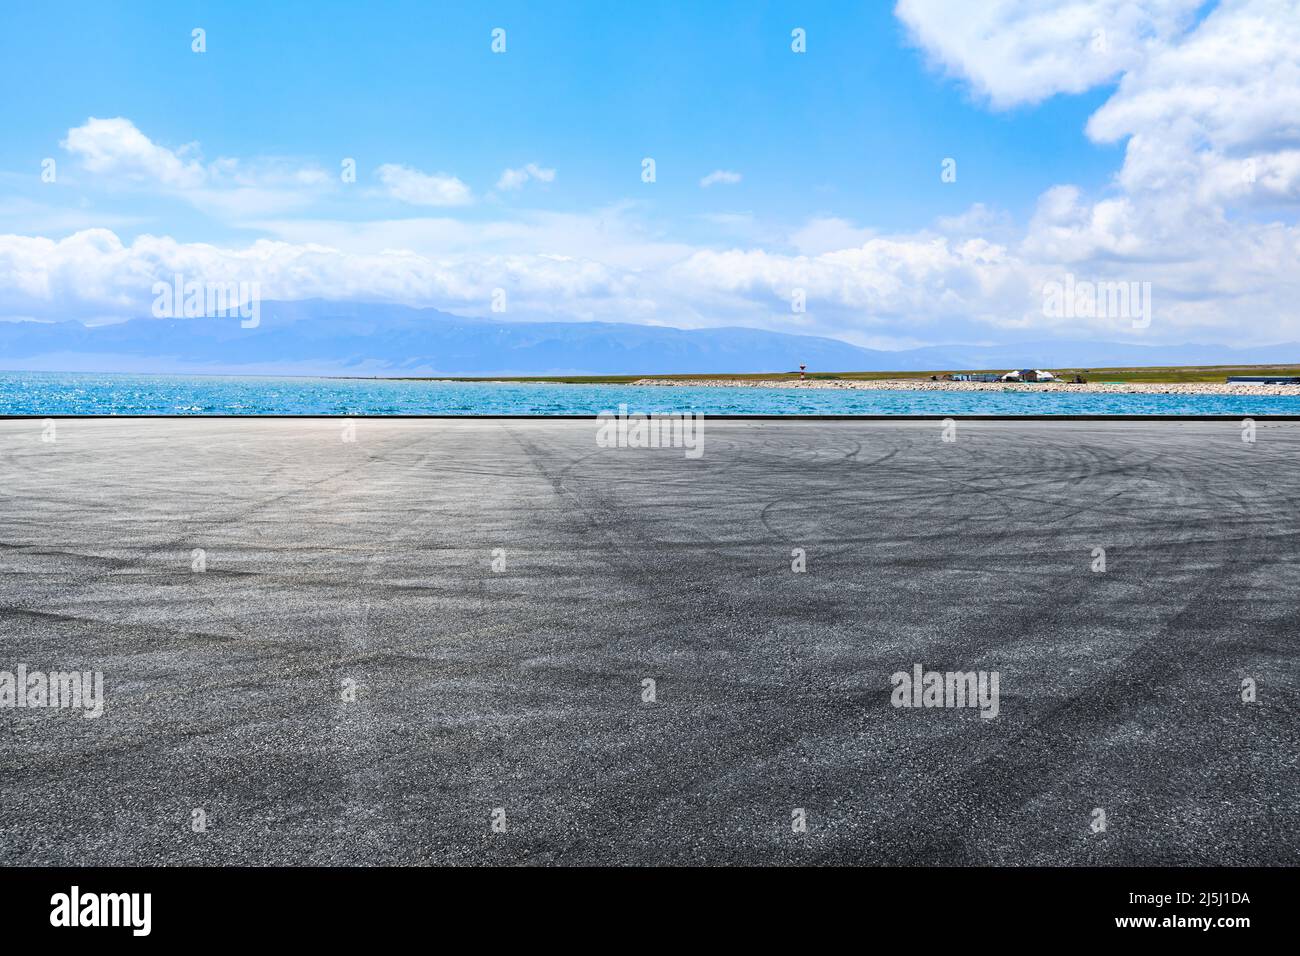 Asphalt road platforms and lake with mountain scenery Stock Photo